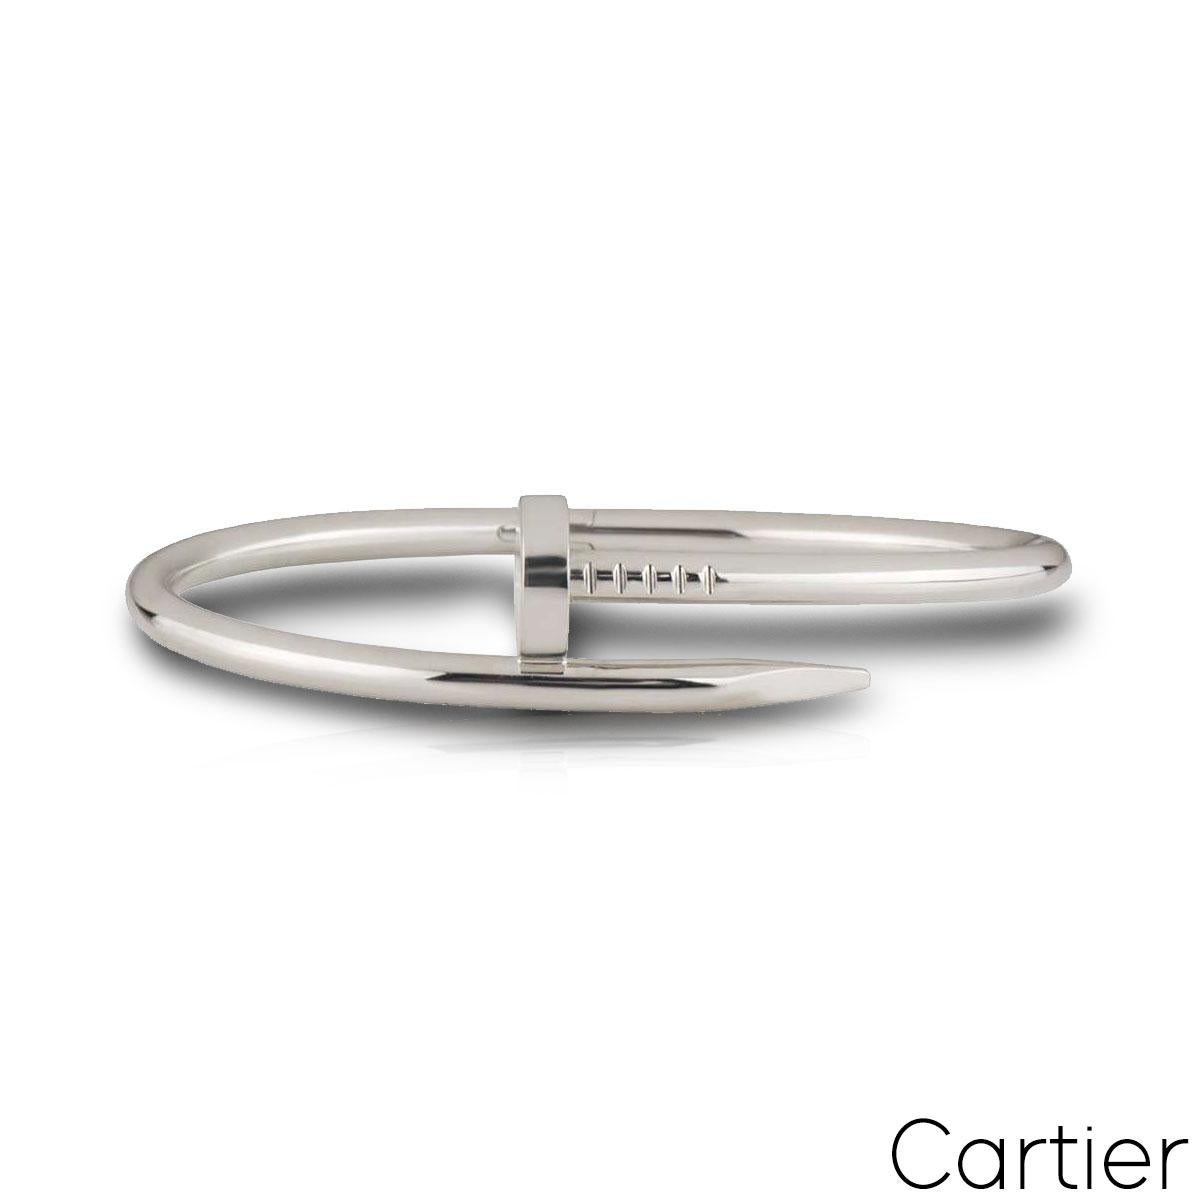 An iconic 18k white gold Cartier bracelet from the Juste un Clou collection. The bracelet is wrapped around with a nail head at one end and nail end at the other. The bracelet features the old clasp and is size 15 with a gross weight of 31.00